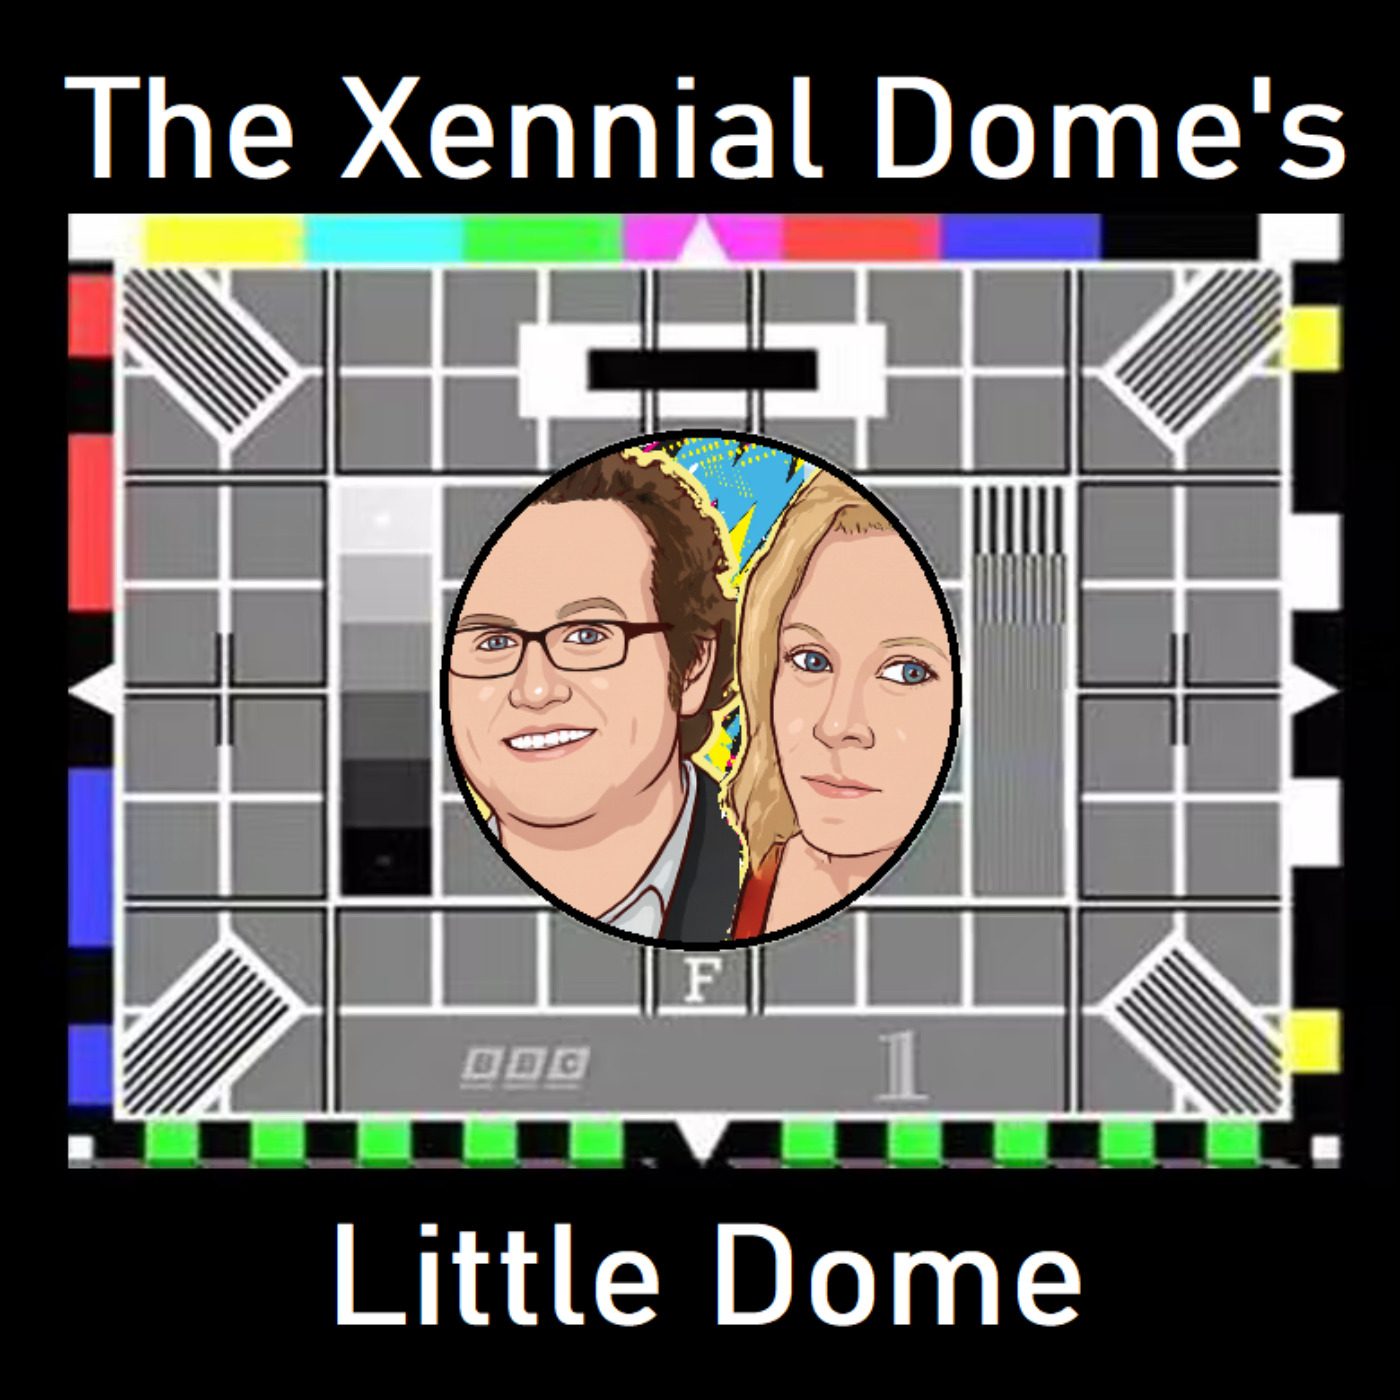 Little Dome: January 1977 (Penalty Kicks and 2 inch TVs)